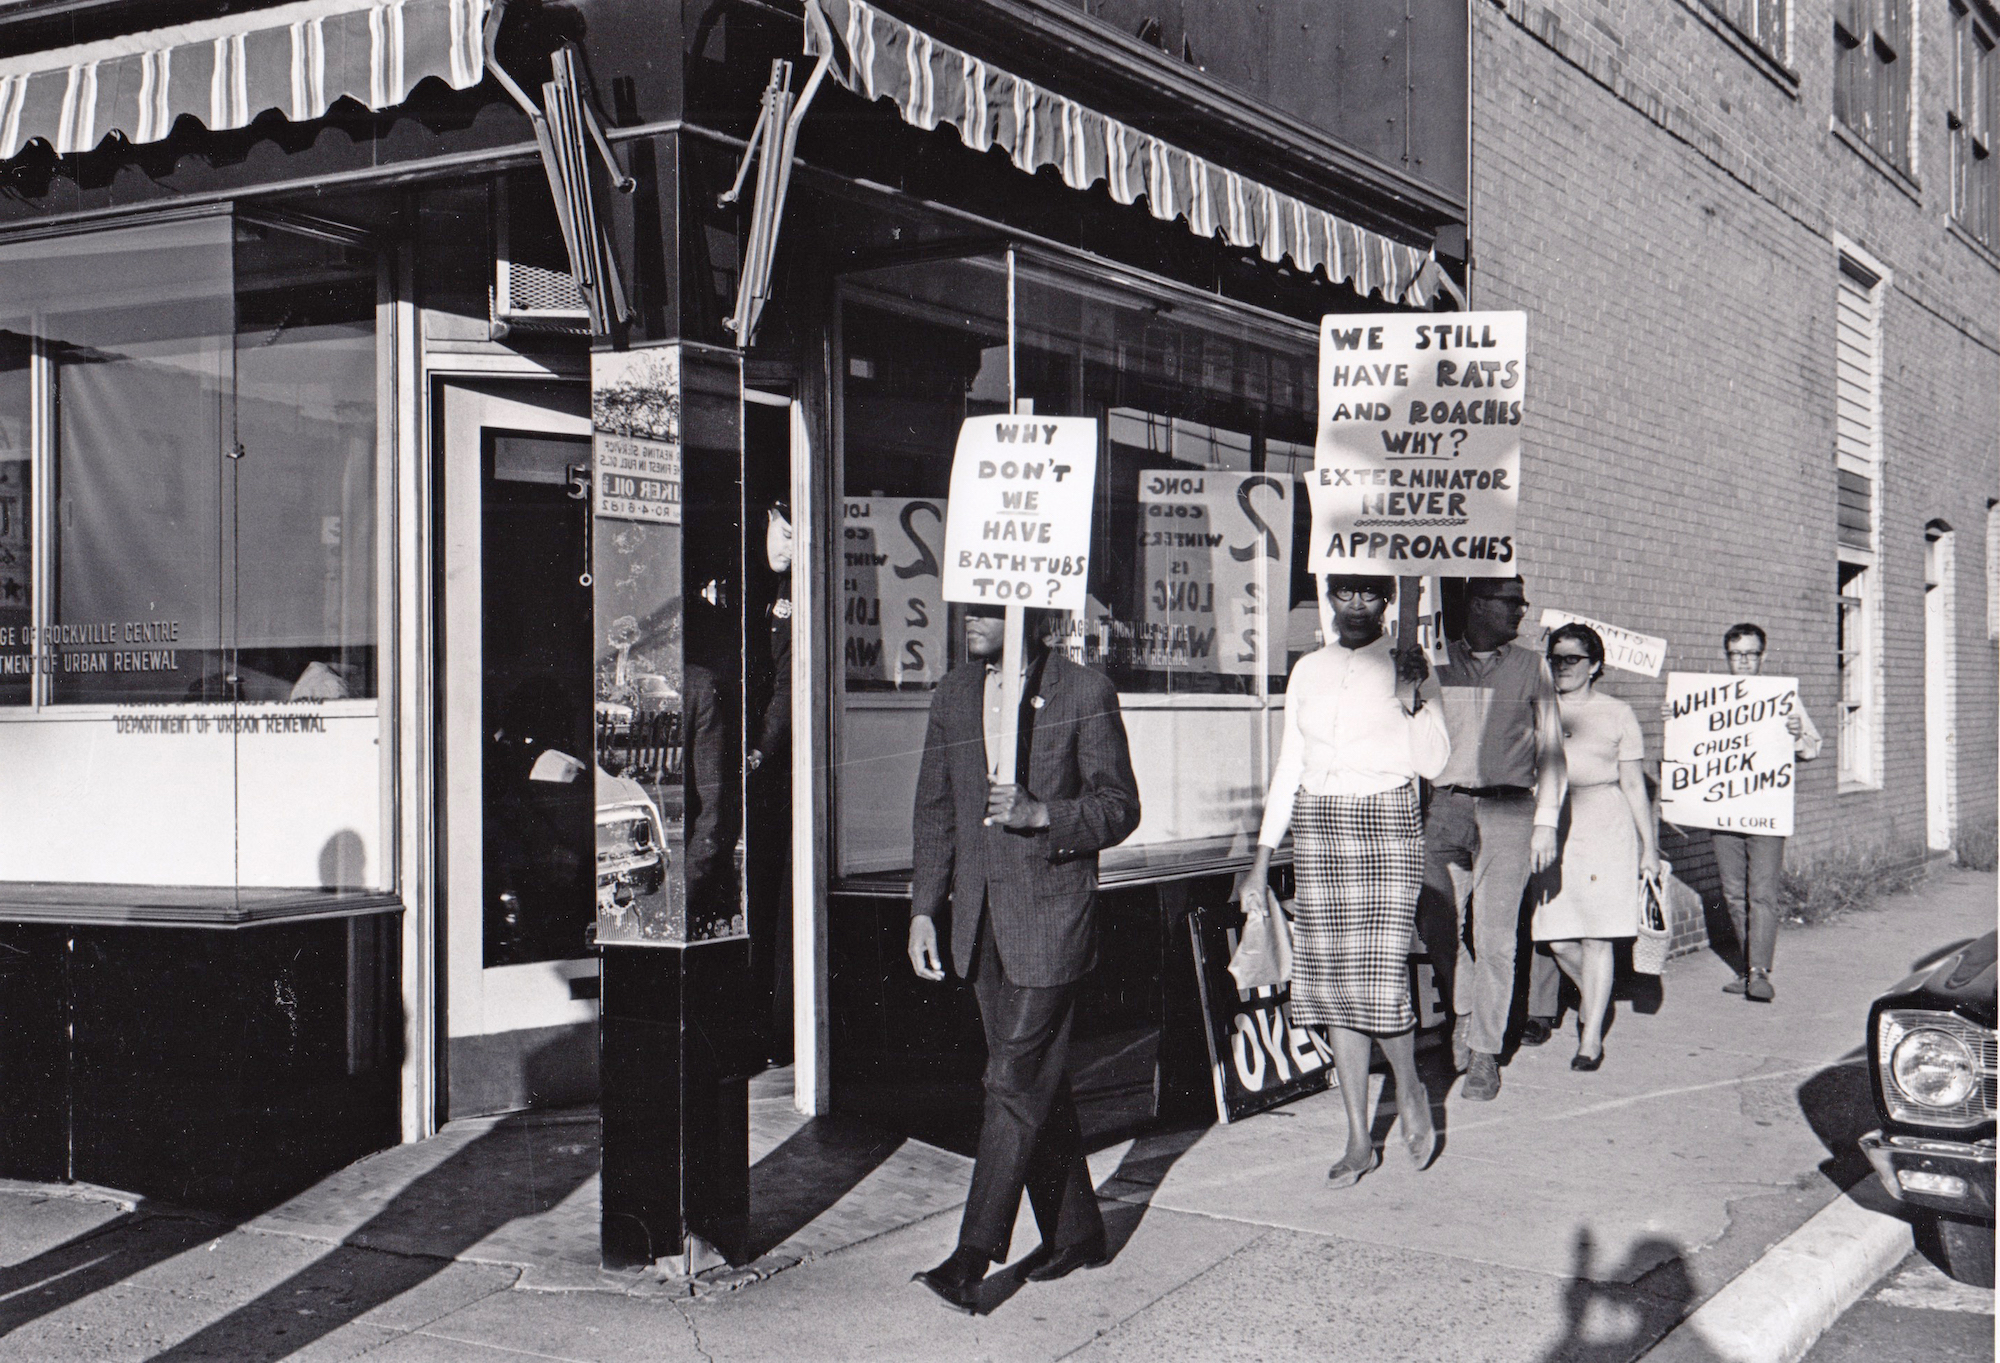 A black and white photo of a group of men and women holding picket signs outside an office